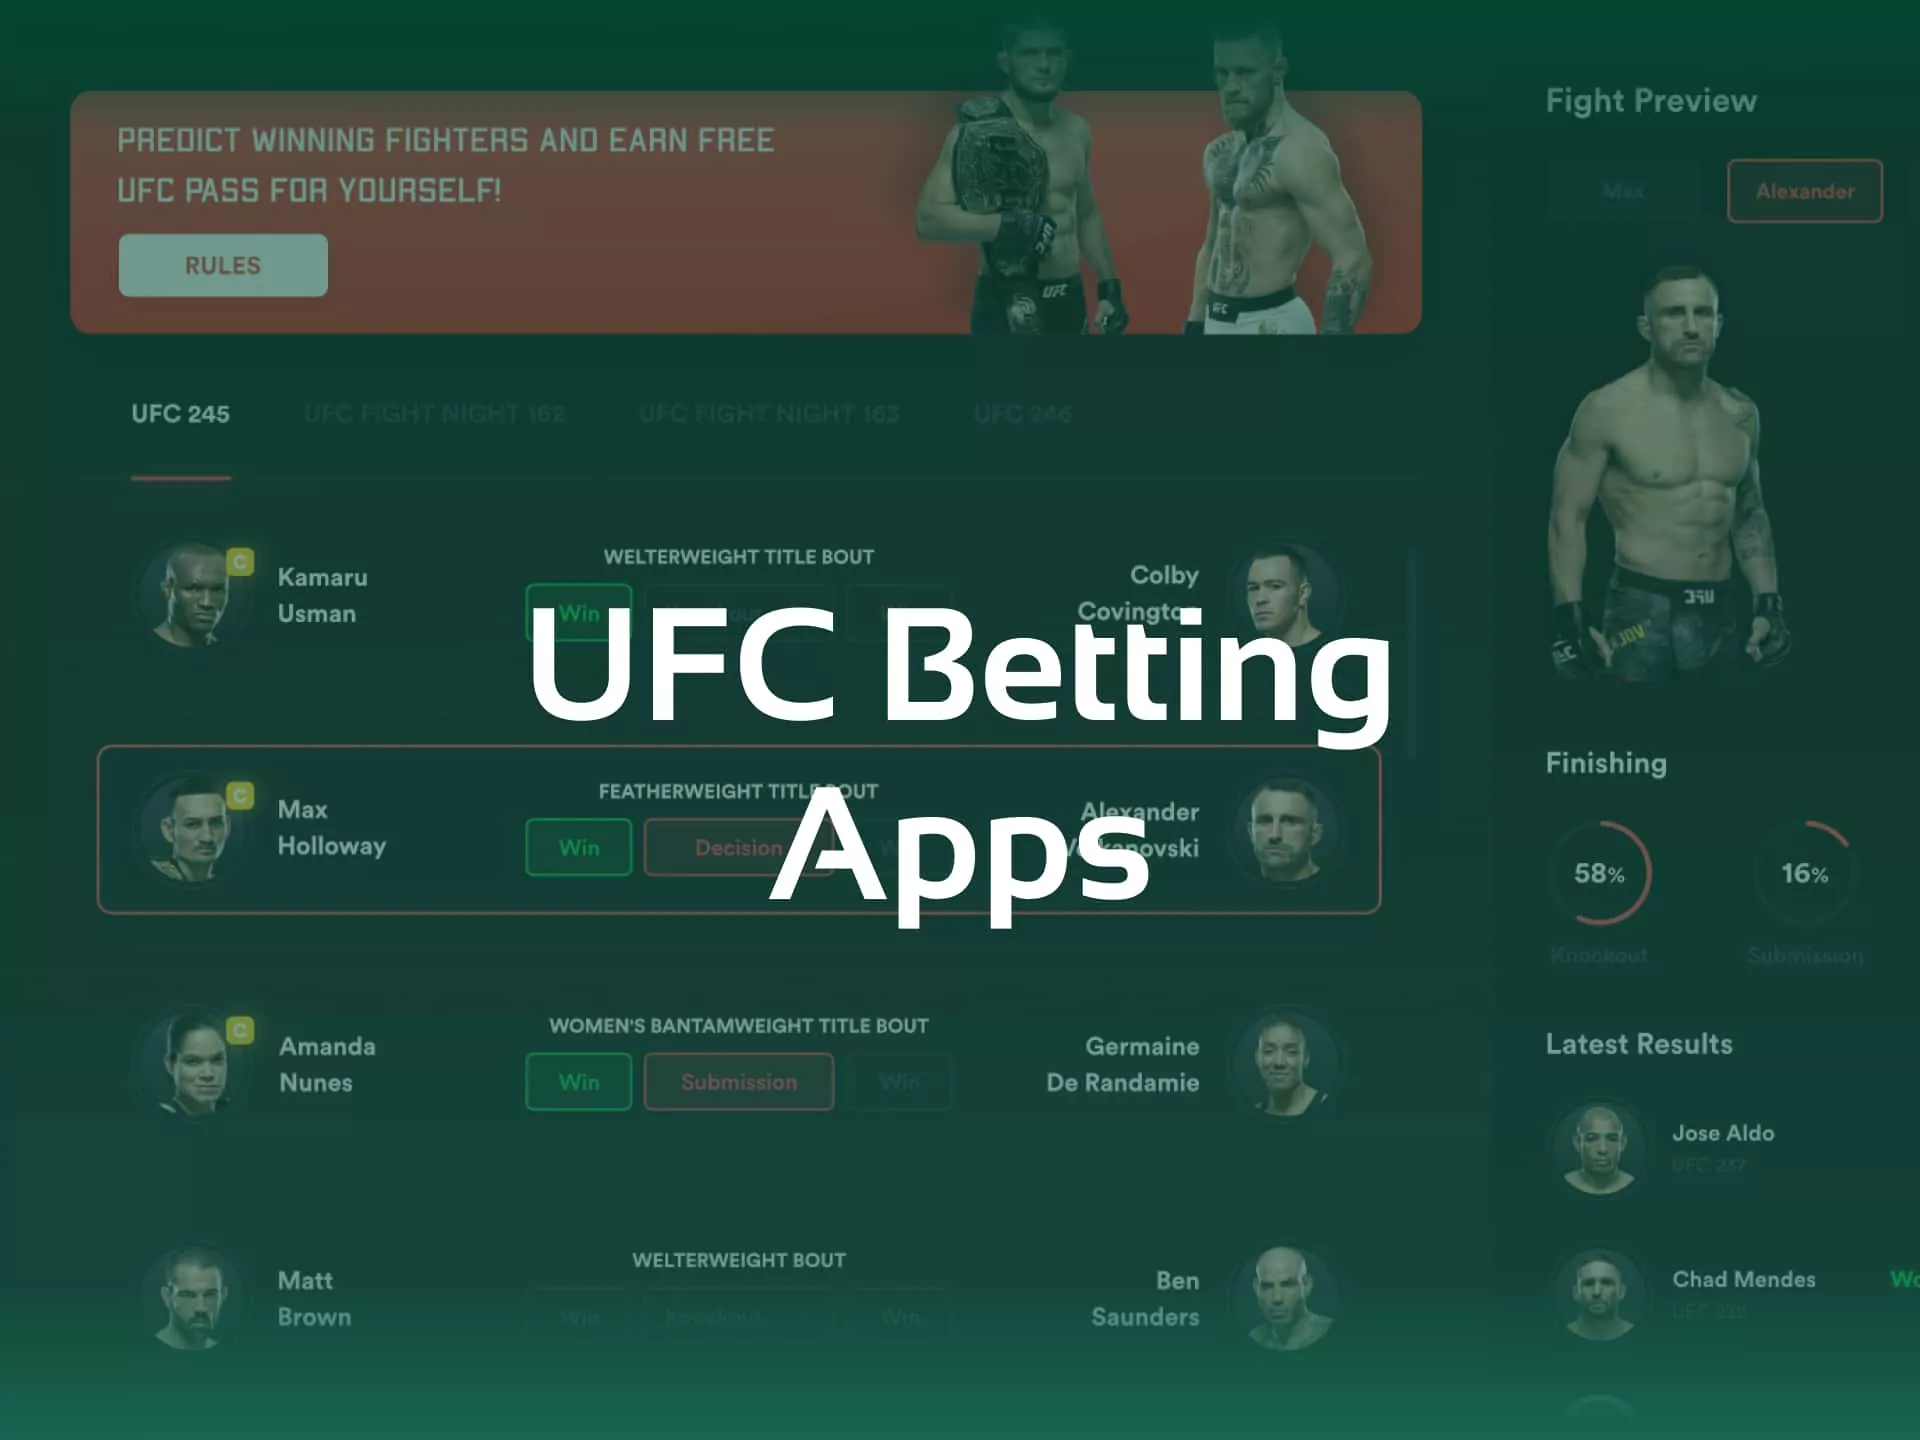 UFC is as convenient in the apps as on the sites. It's useful brokers feature.